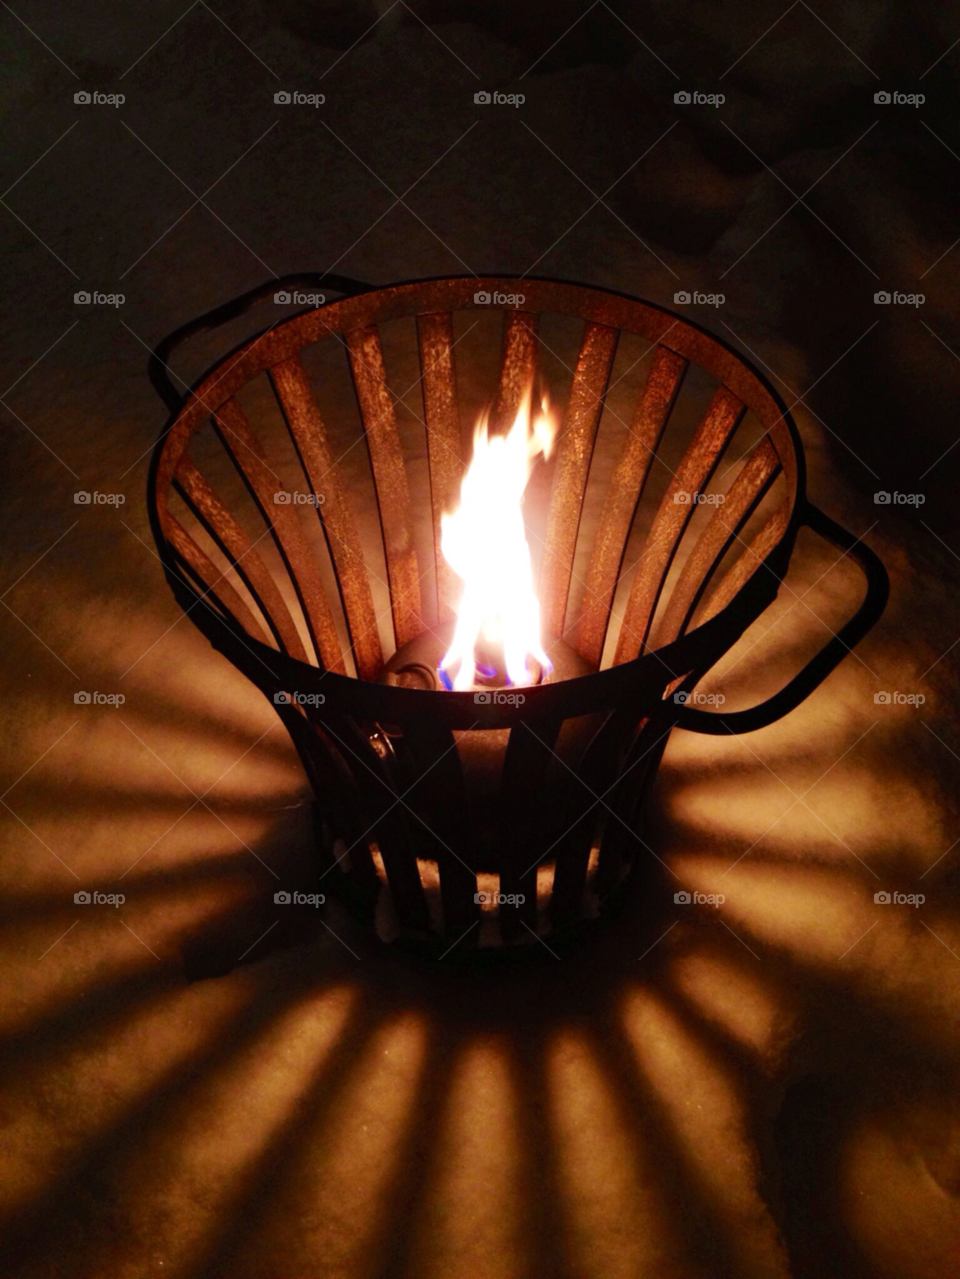 stockholm flame fire evening night winter advent december minus degrees beautiful lgt41 by lgt41